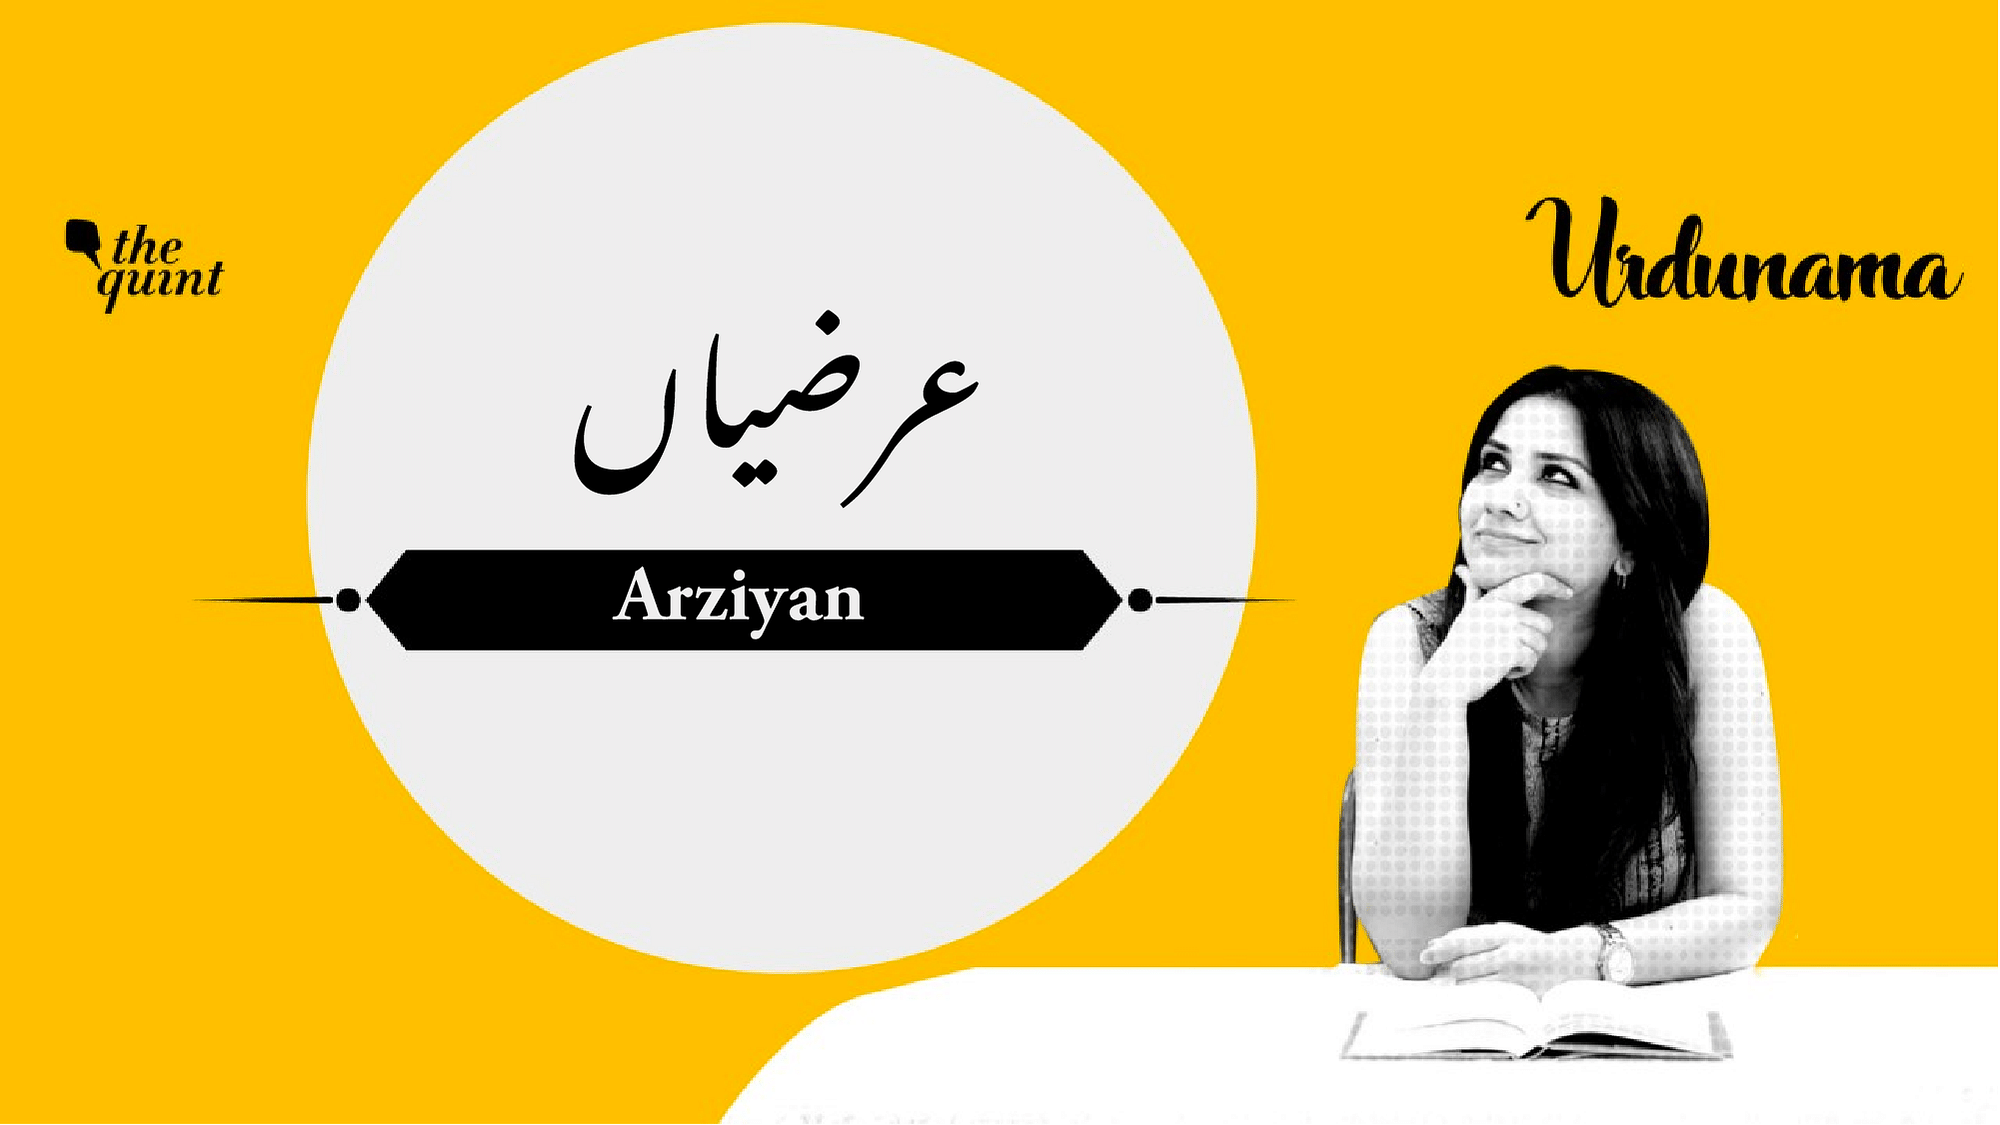 This episode of Urdunama tries to find out if it’s arziyan which reach God or a guru who does.&nbsp;